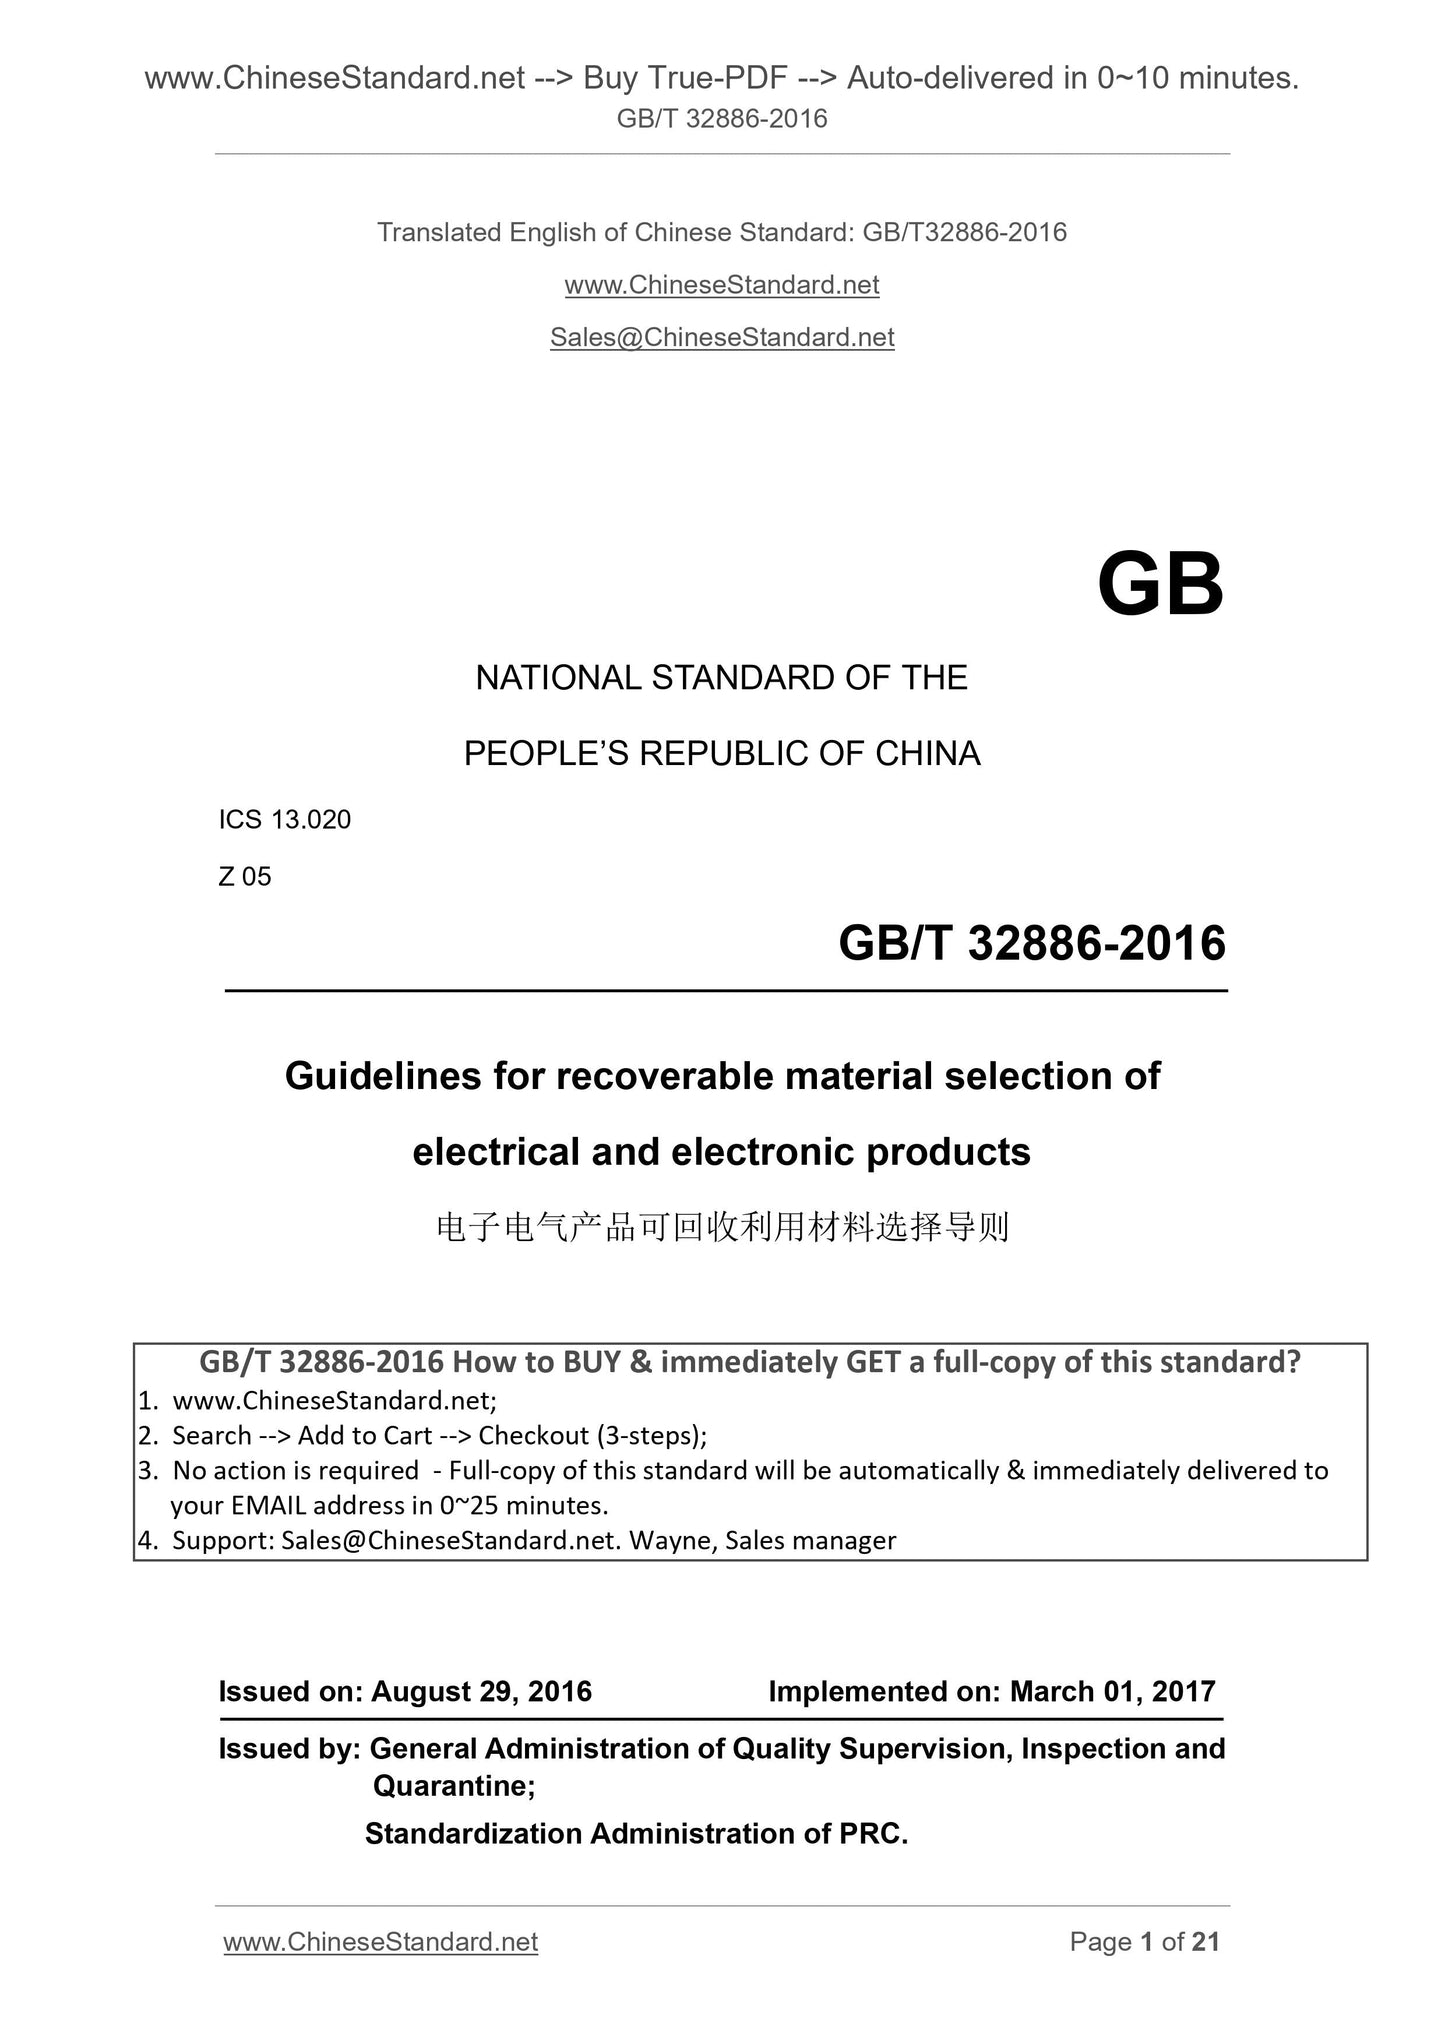 GB/T 32886-2016 Page 1